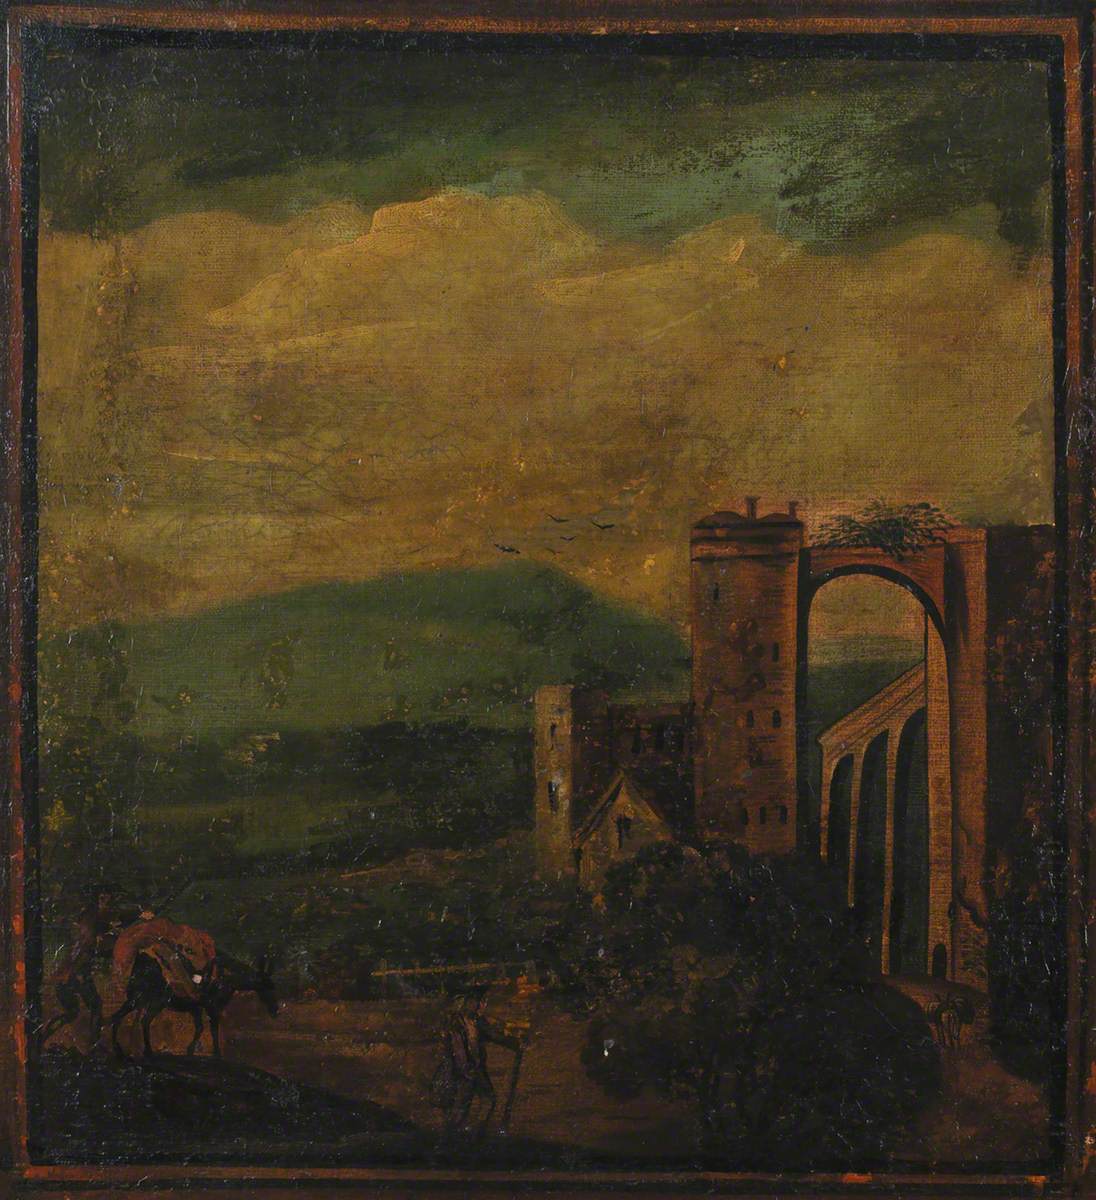 Screen: Landscape with a Building and Arches